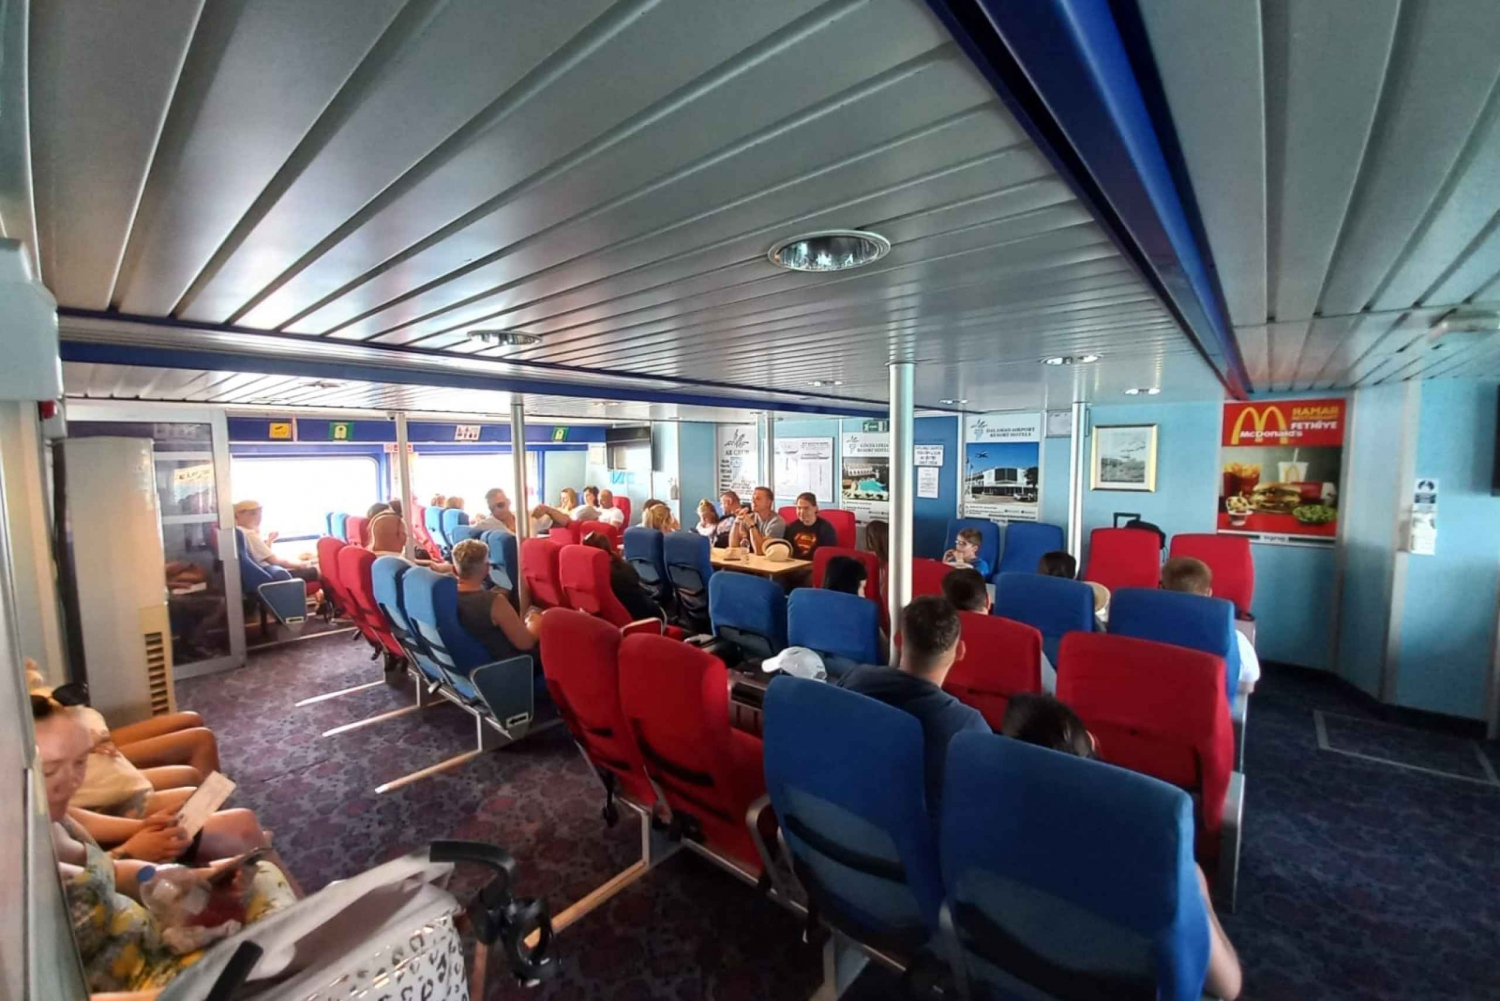 From Bodrum: Ferry Transfer to Kos